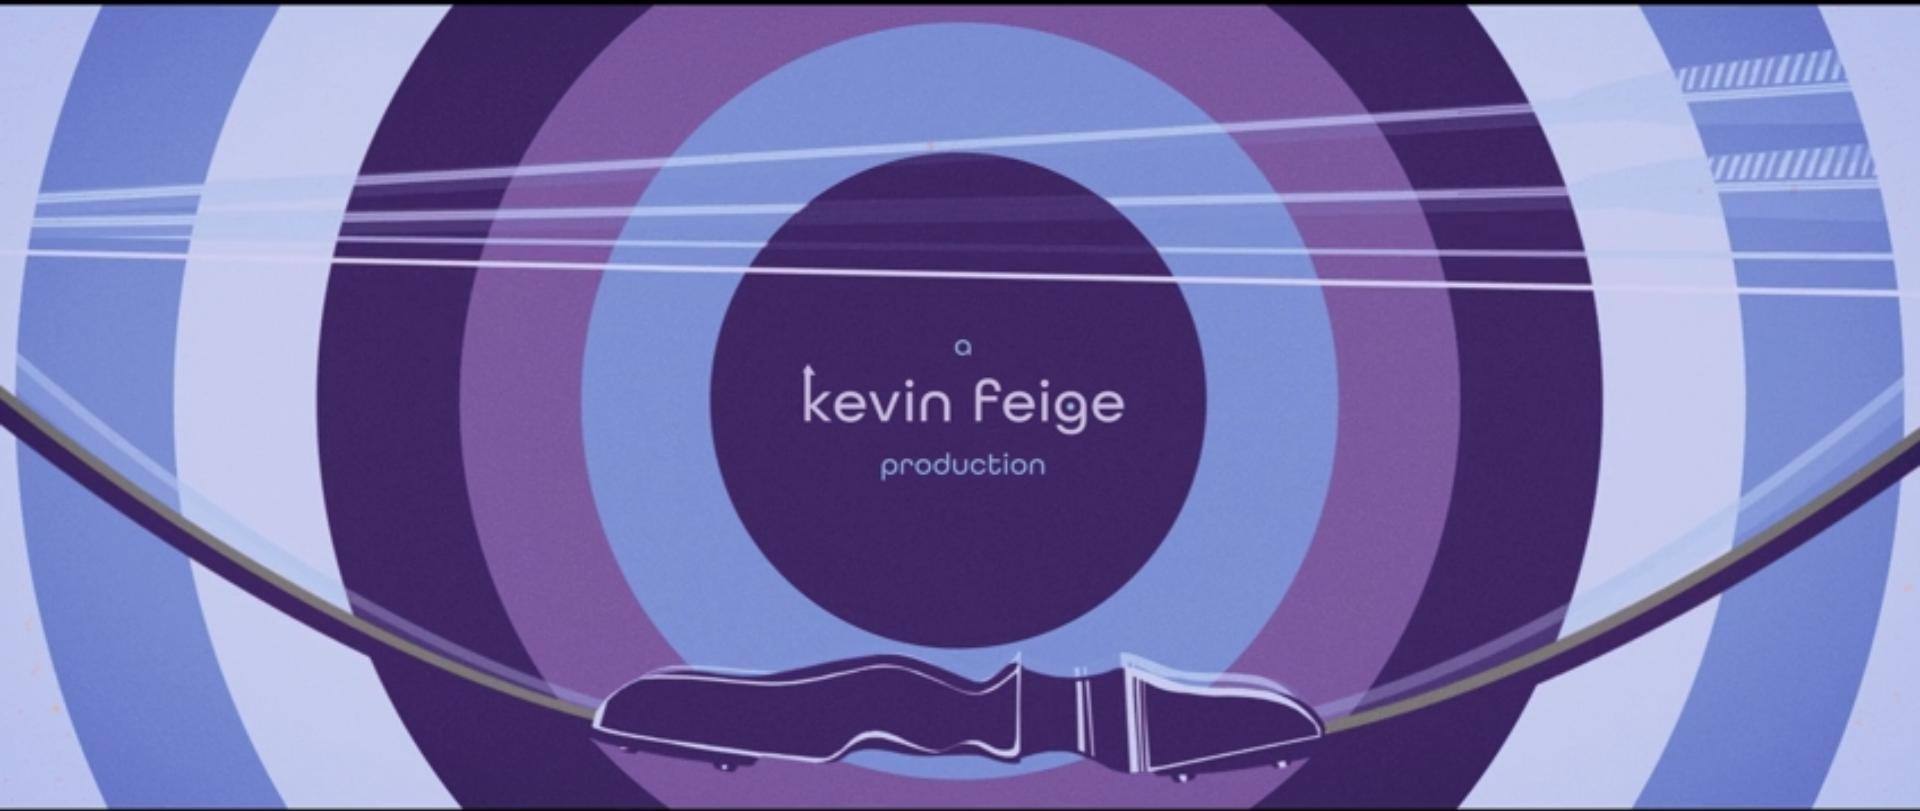 A still of the credits, saying "a Kevin Feige Production". His name is at a center of concentric circles like a target, the colors are purple, light blue, pink, more purple, and white. At the bottom of the pic is a drawn bow, in pink-ish purple.